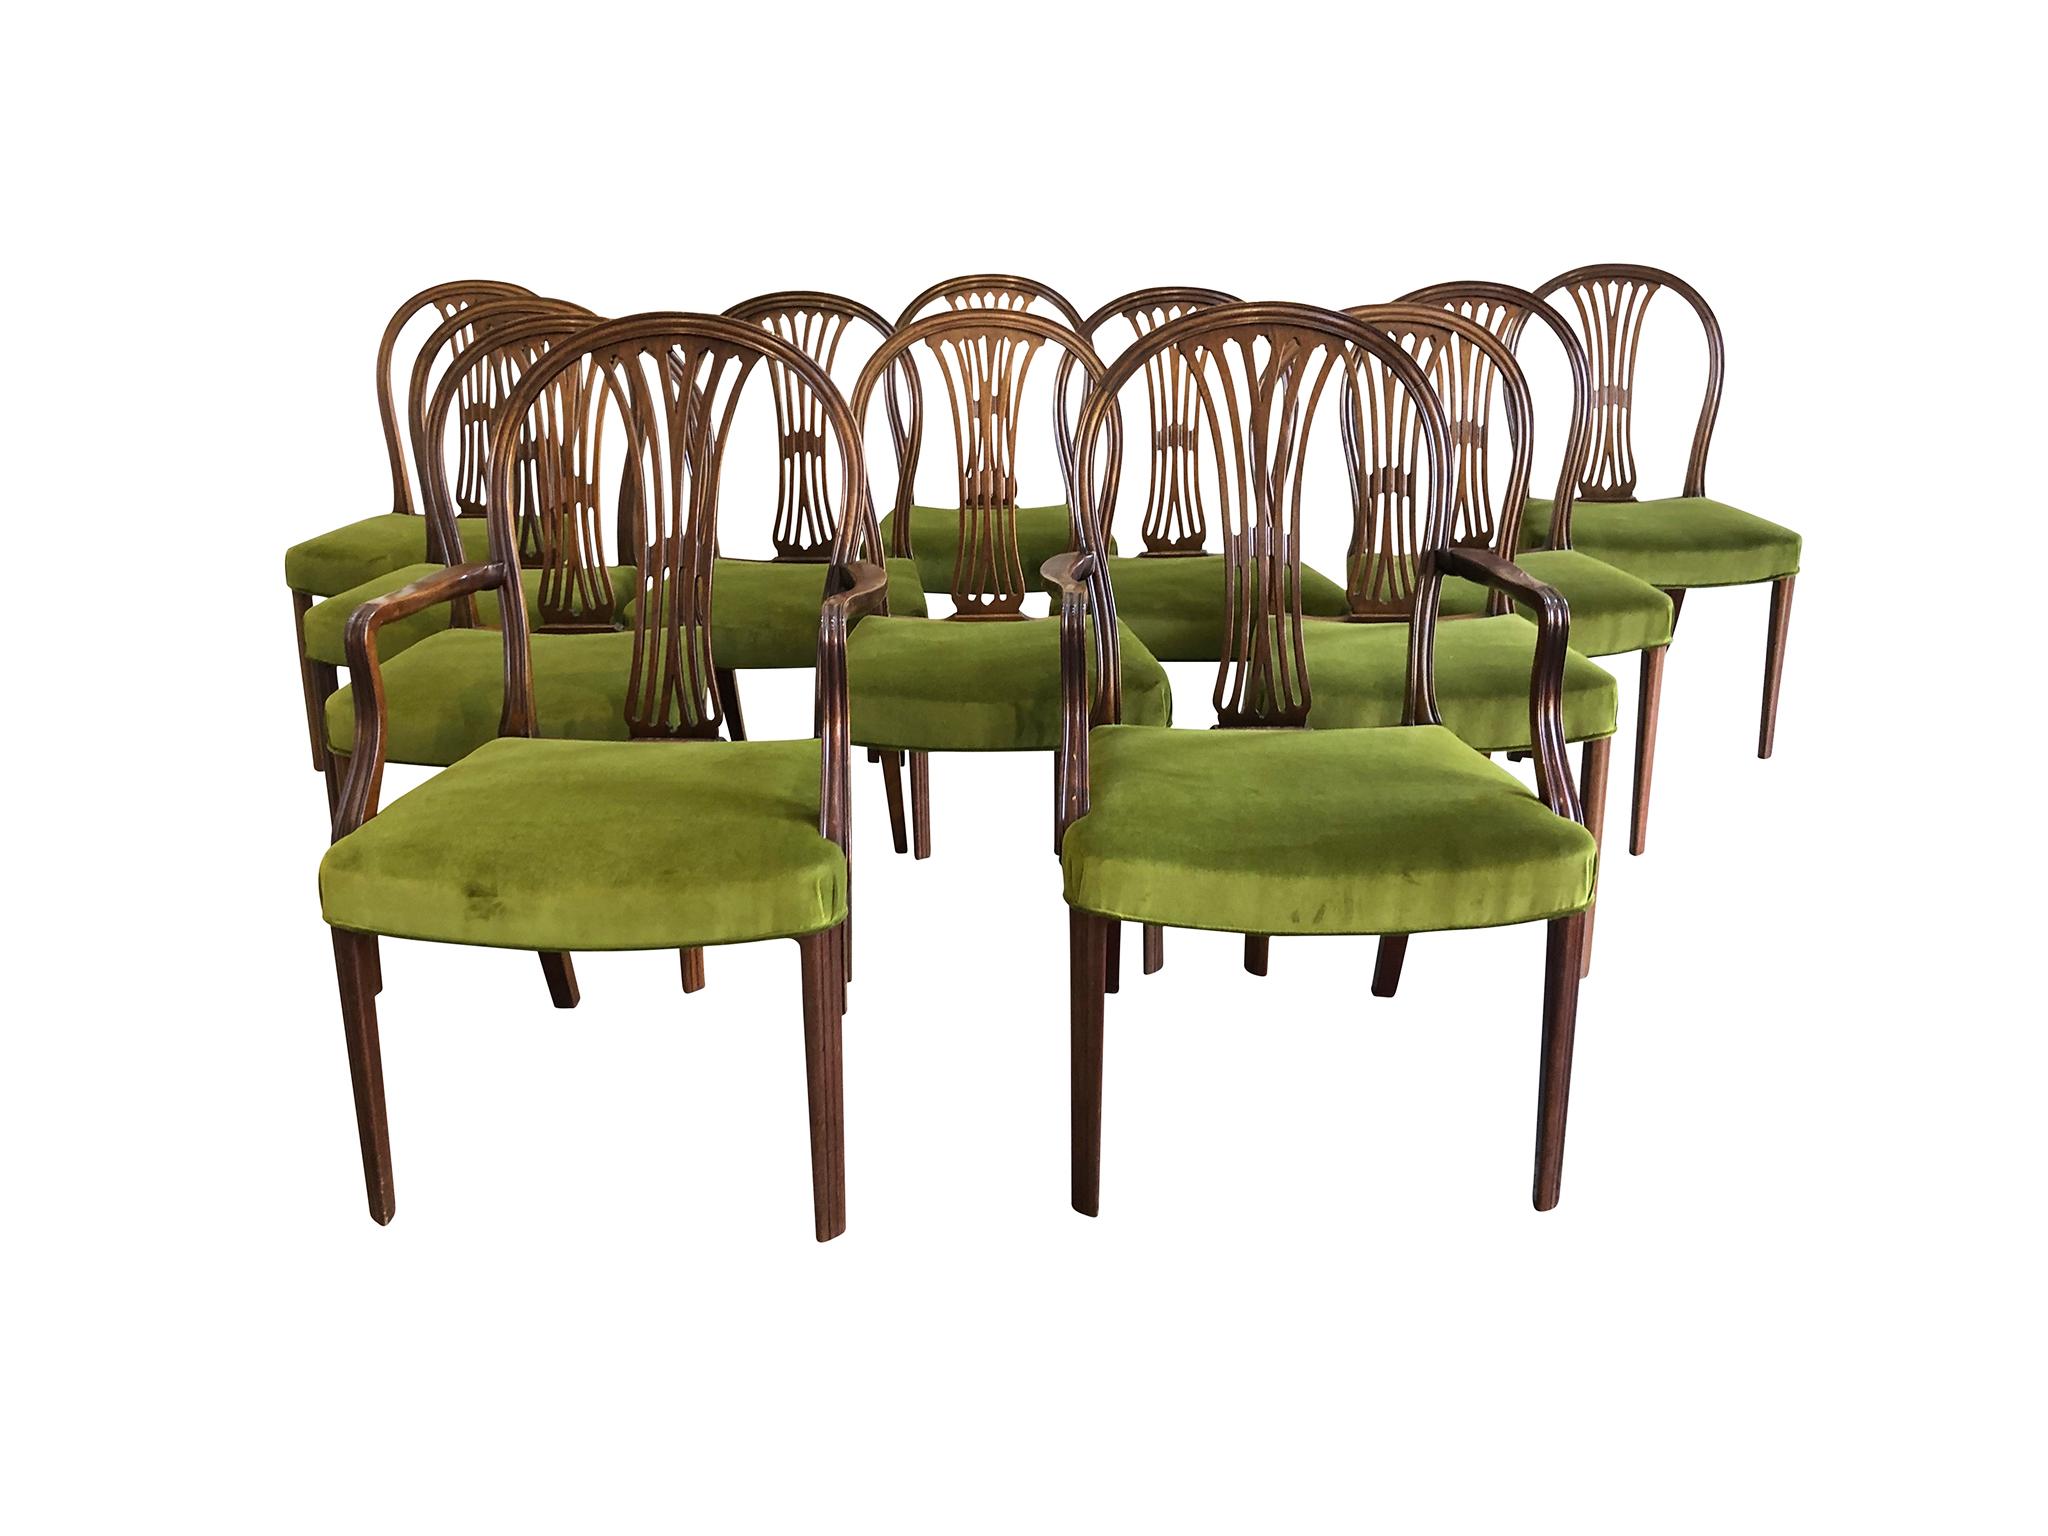 Frits Henningsen's designs are renowned for their excellent craftsmanship. This set of 1930s dining chairs are among his best works. They are mahogany and newly reupholstered in fern-green Gainsborough velvet from Schumacher. The set is comprised of